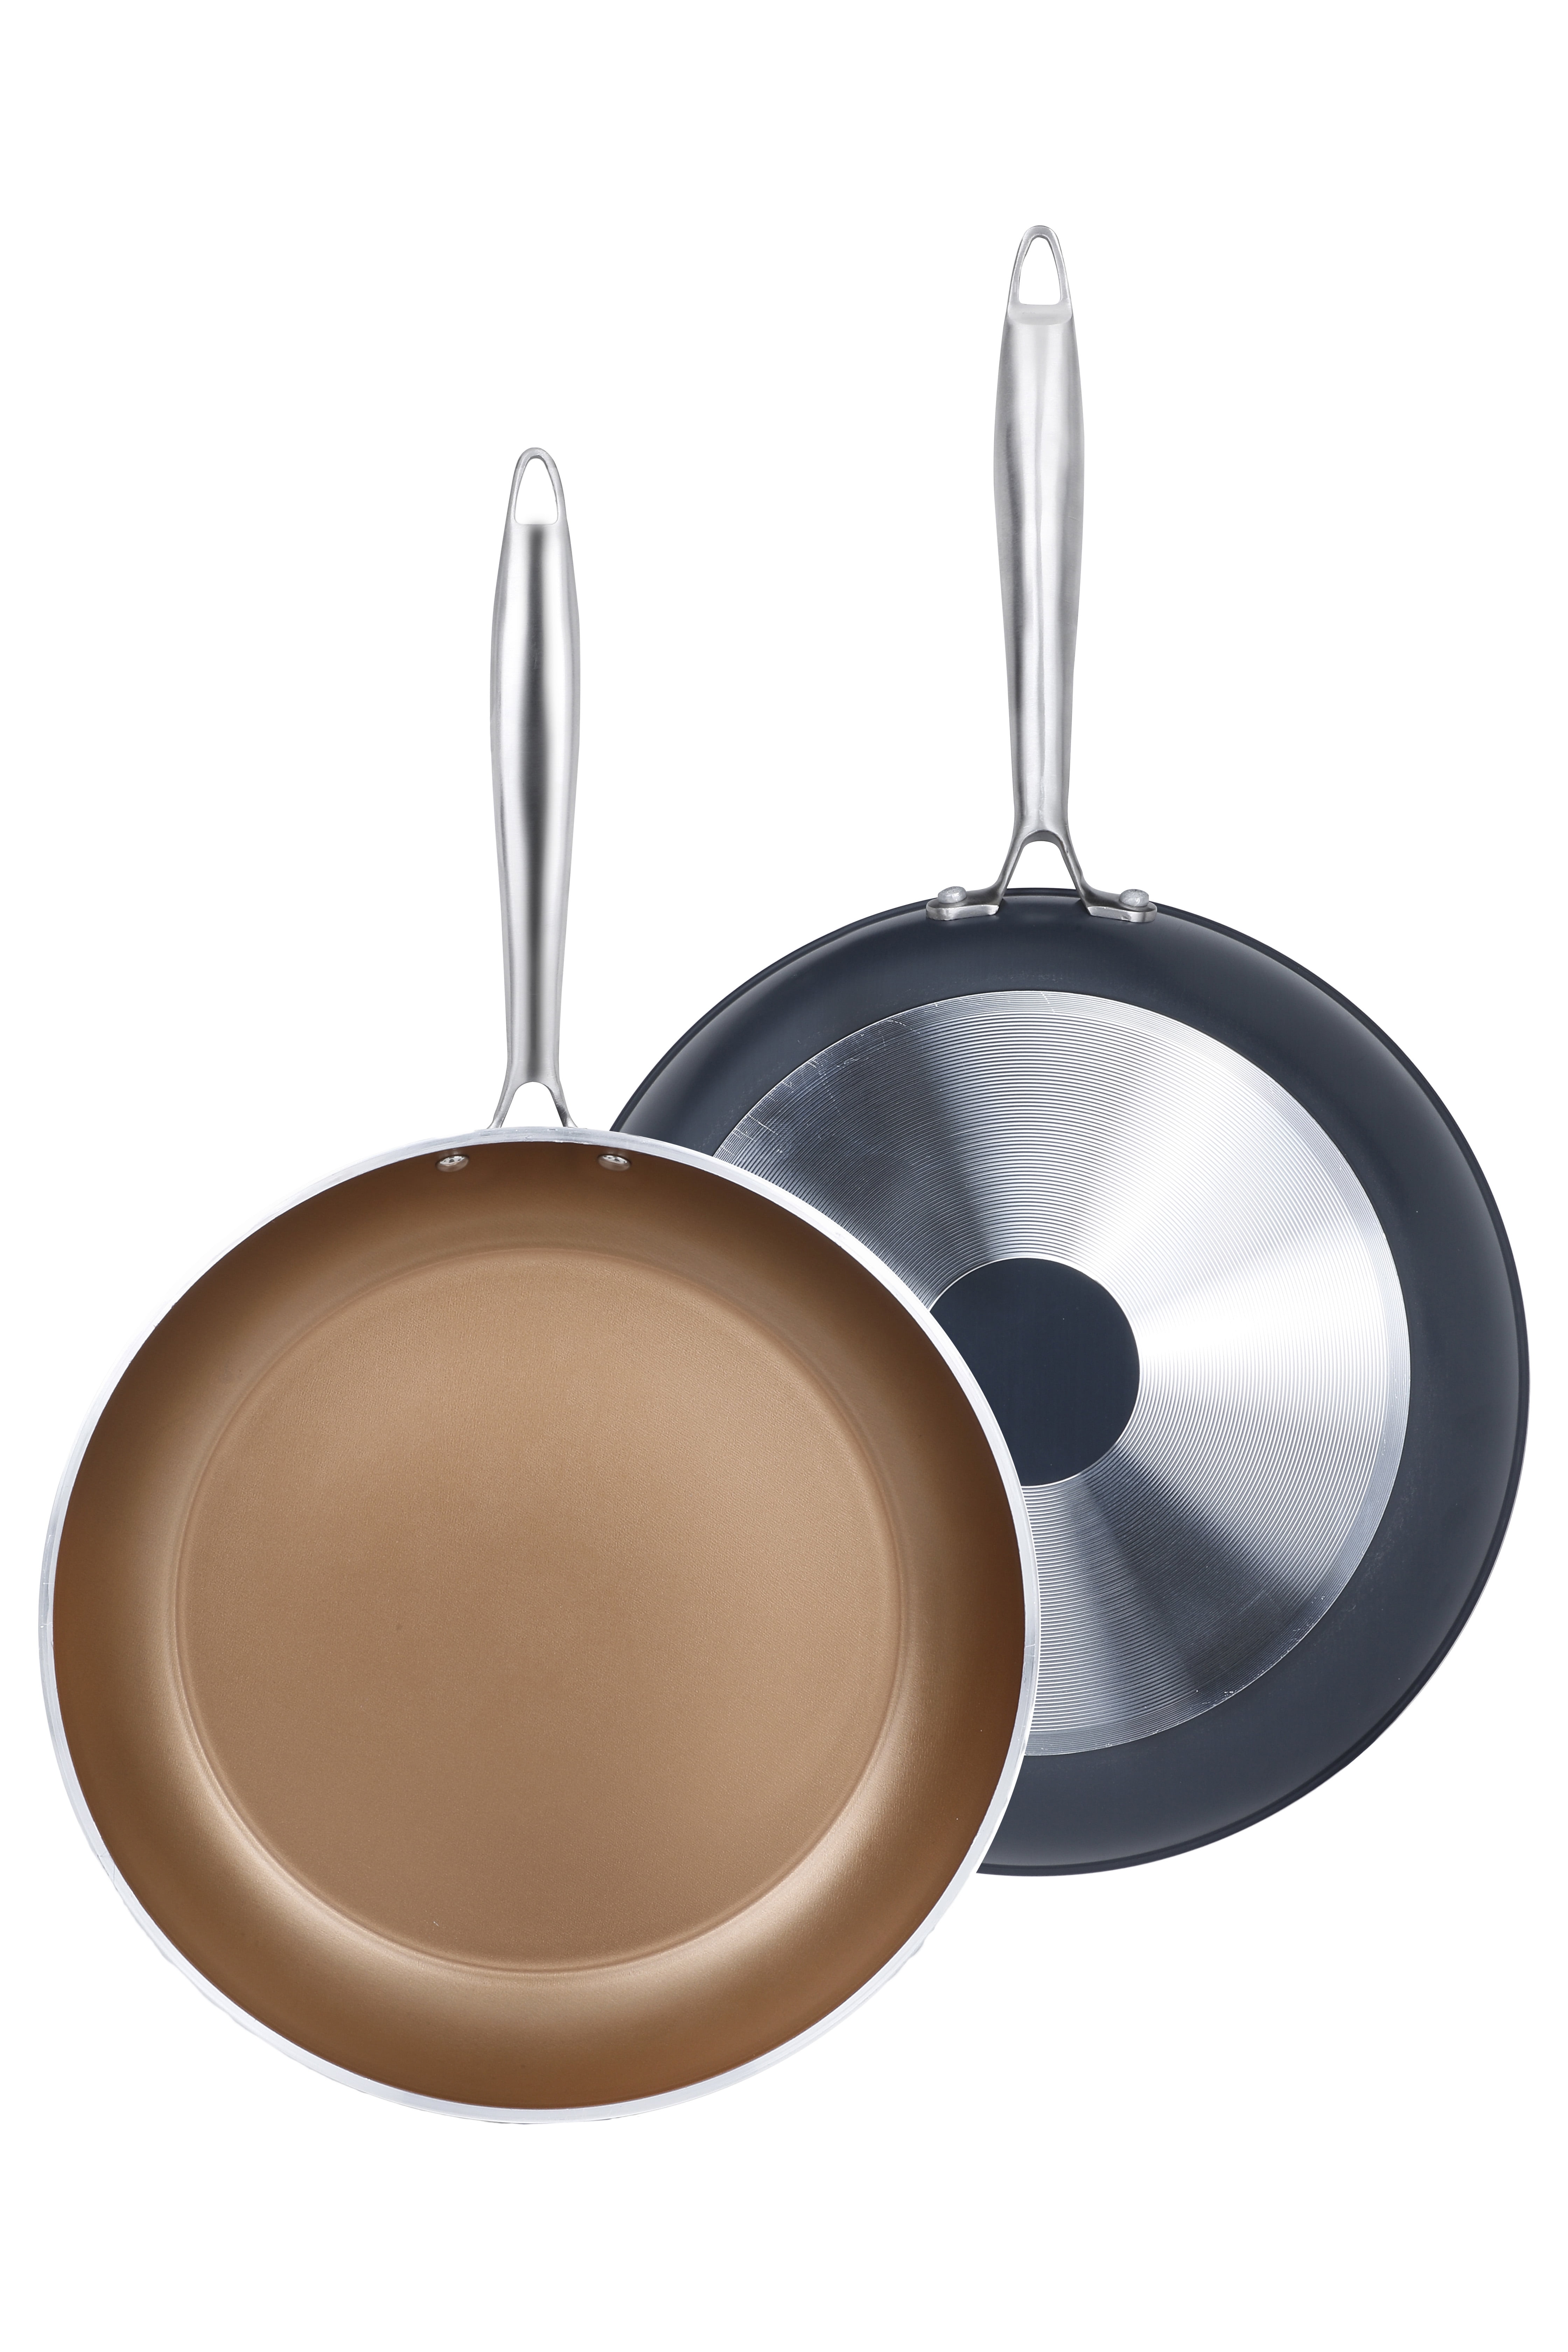 NEWARE 3pc Non-Stick Marble Forged Aluminum Frying Pan Set (8, 10 12)